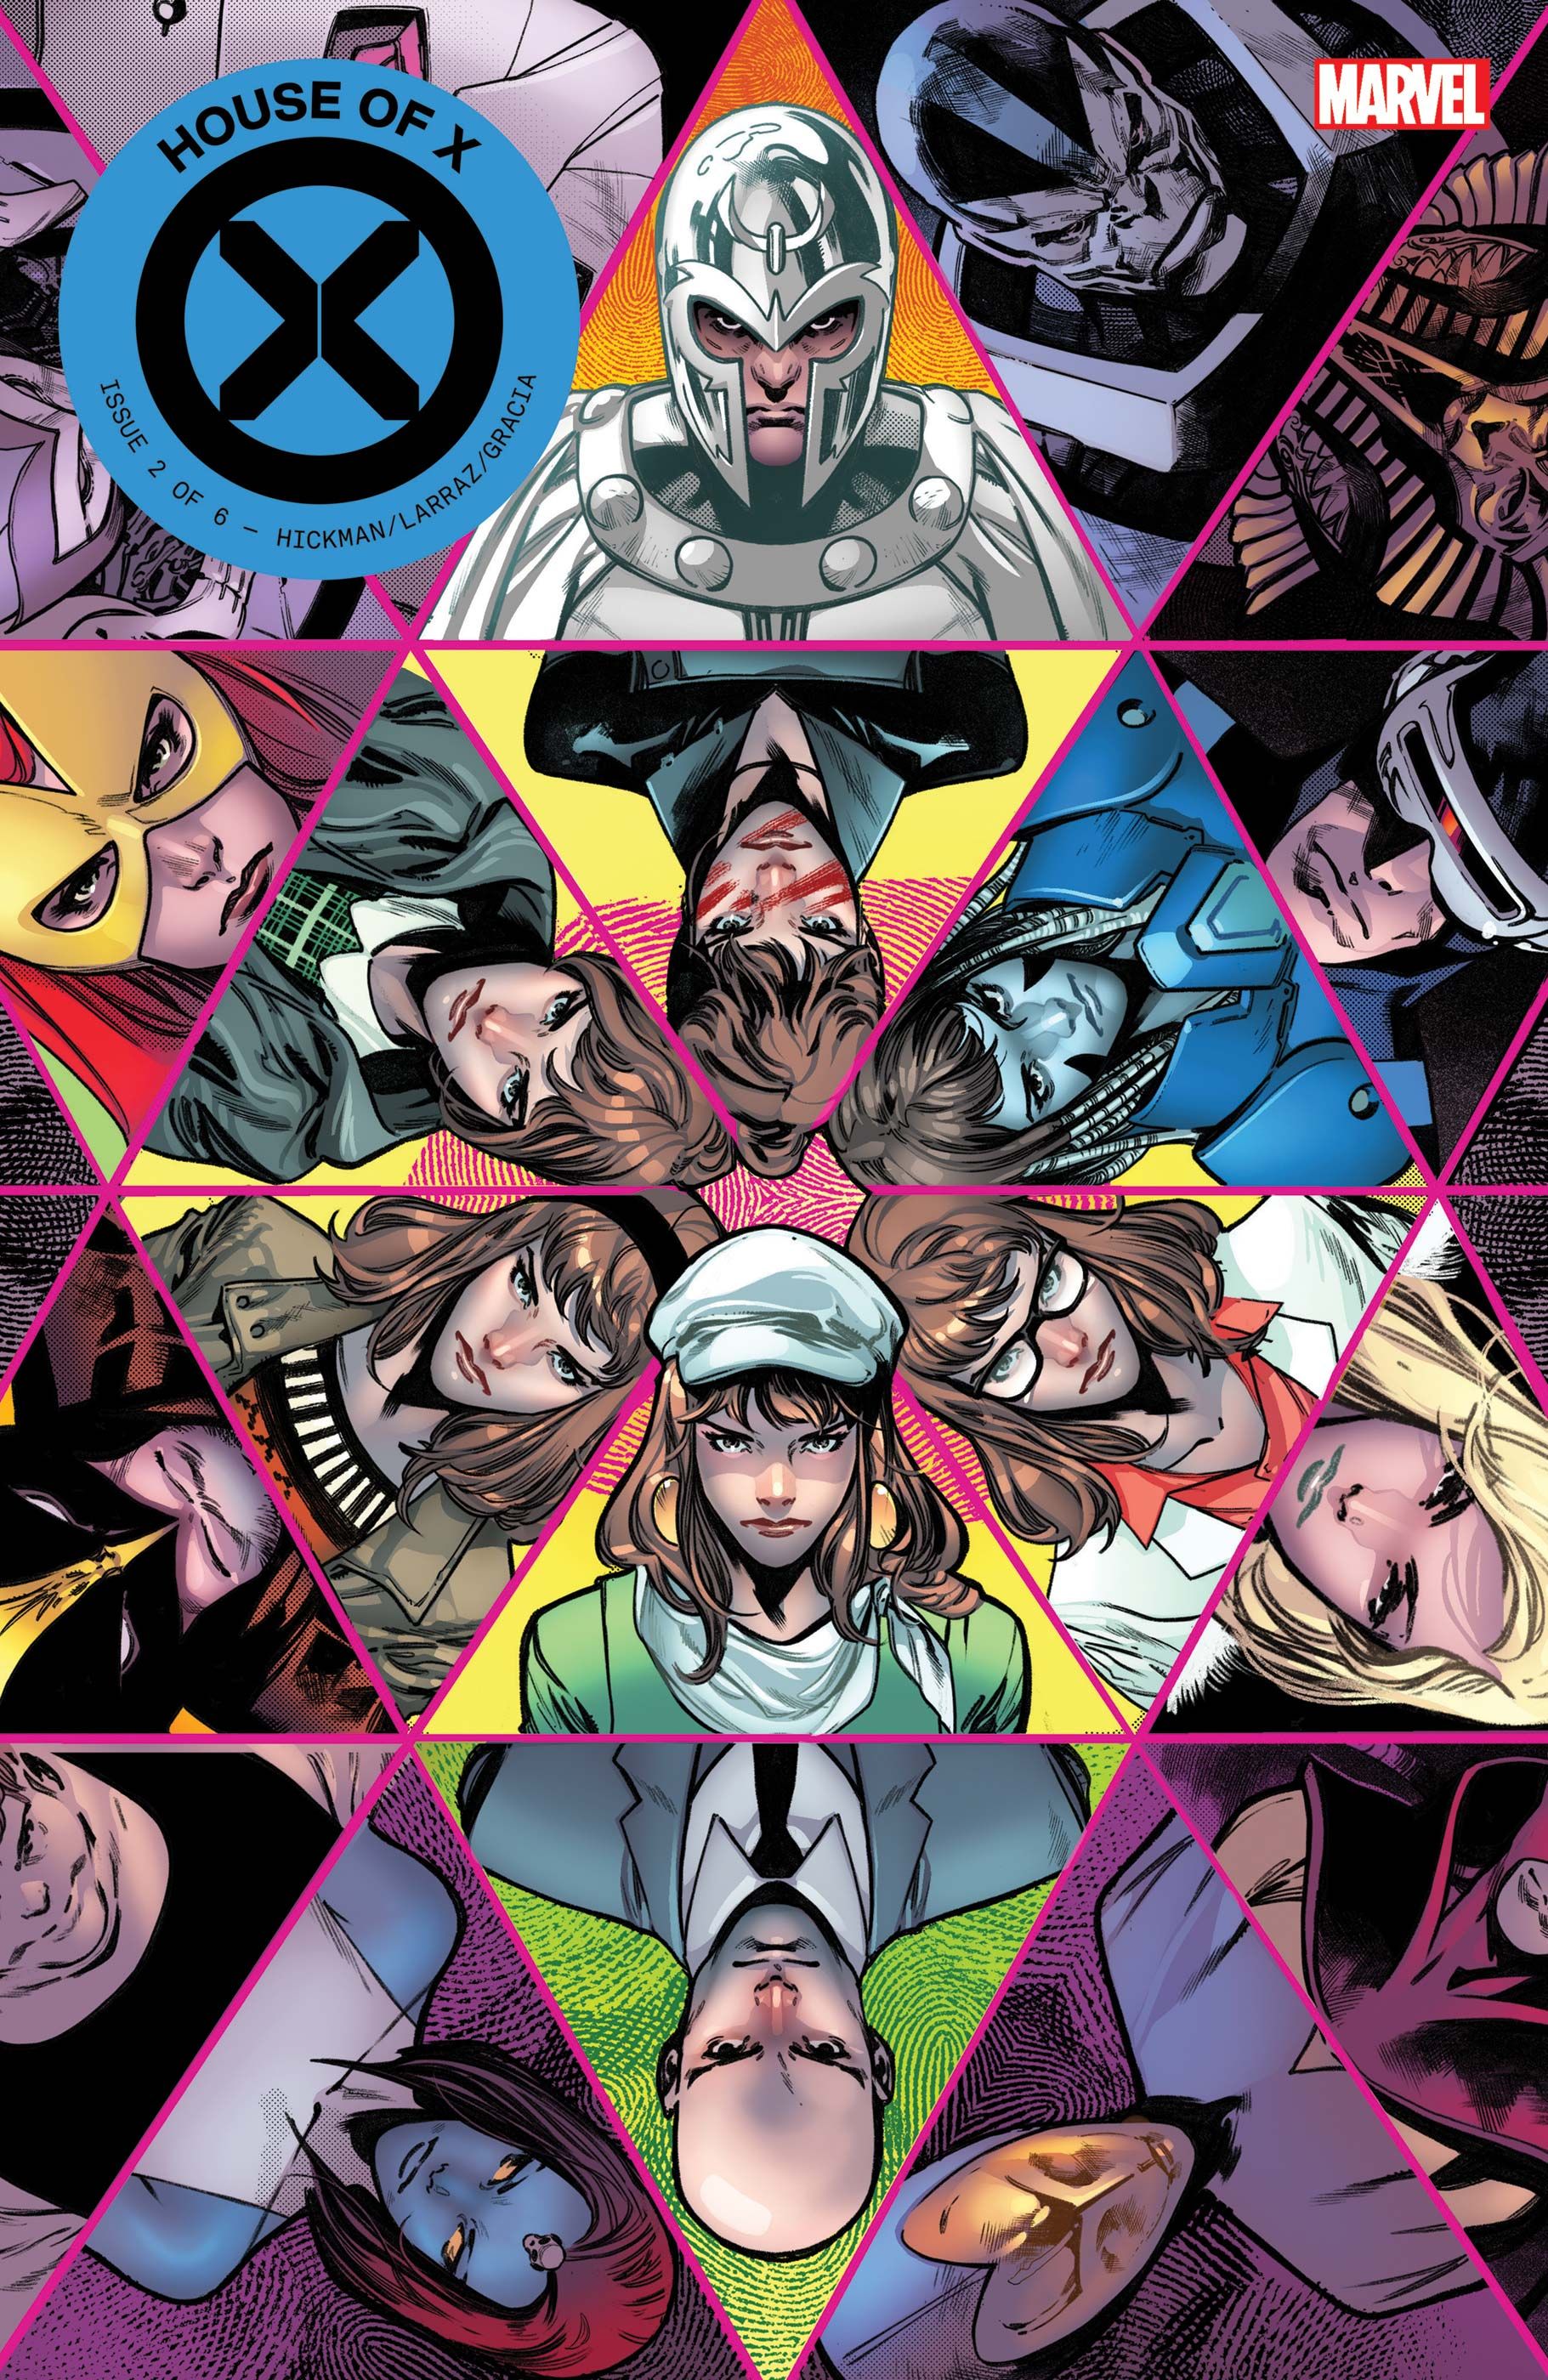 Pepe Larraz and Marte Gracia's cover to House of X #2, featuring the fractal lives of Moira MacTaggert